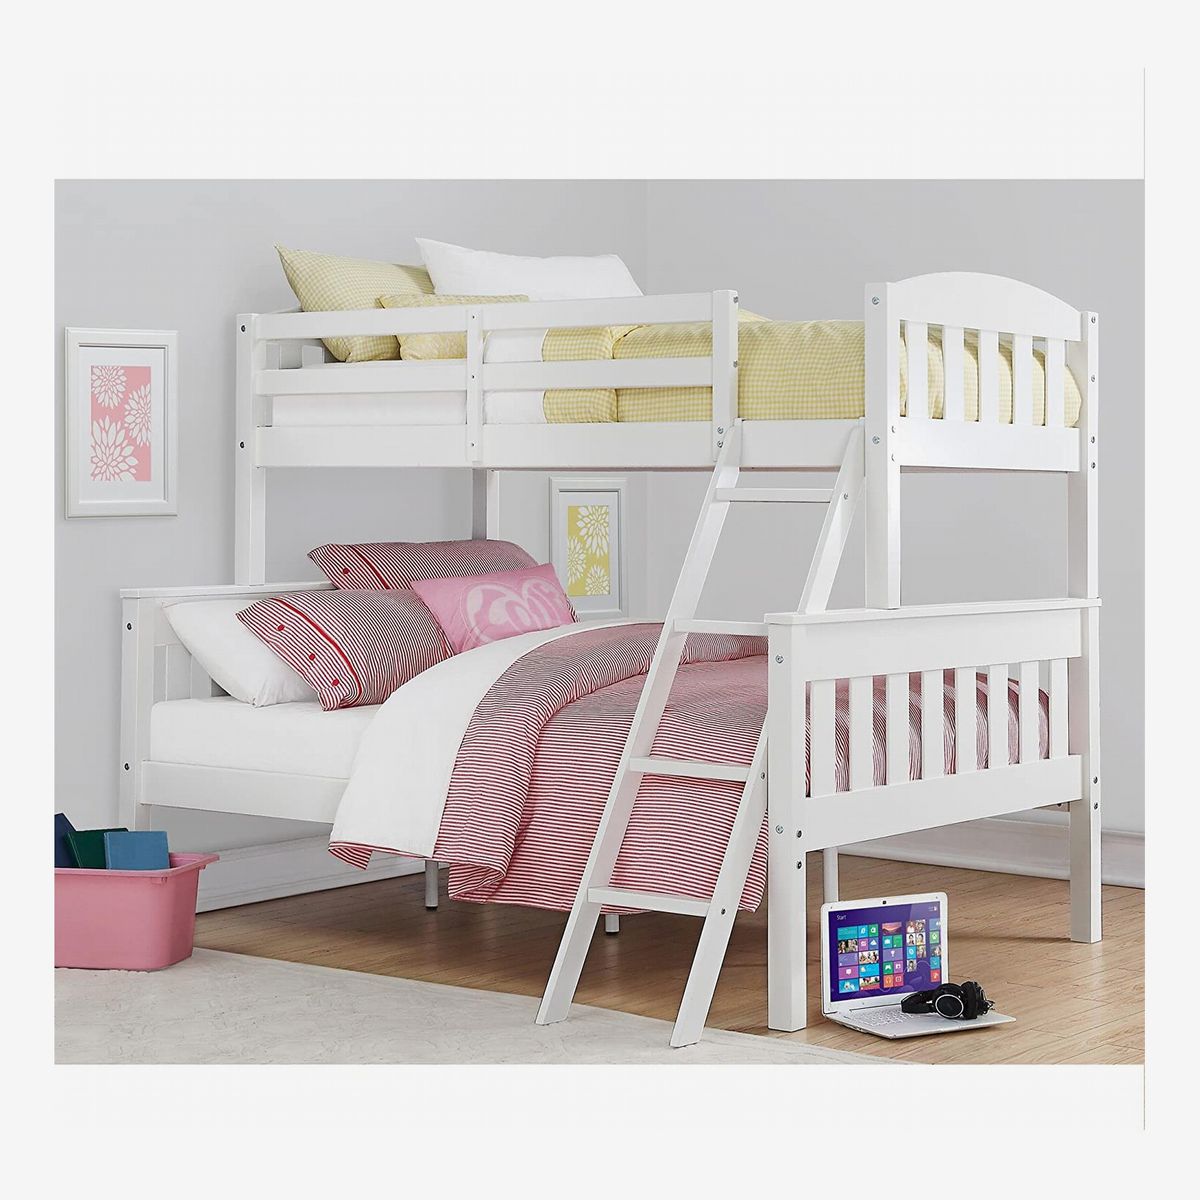 8 Best Bunk Beds 2020 The Strategist, Bunk Beds With Full Bed On Bottom